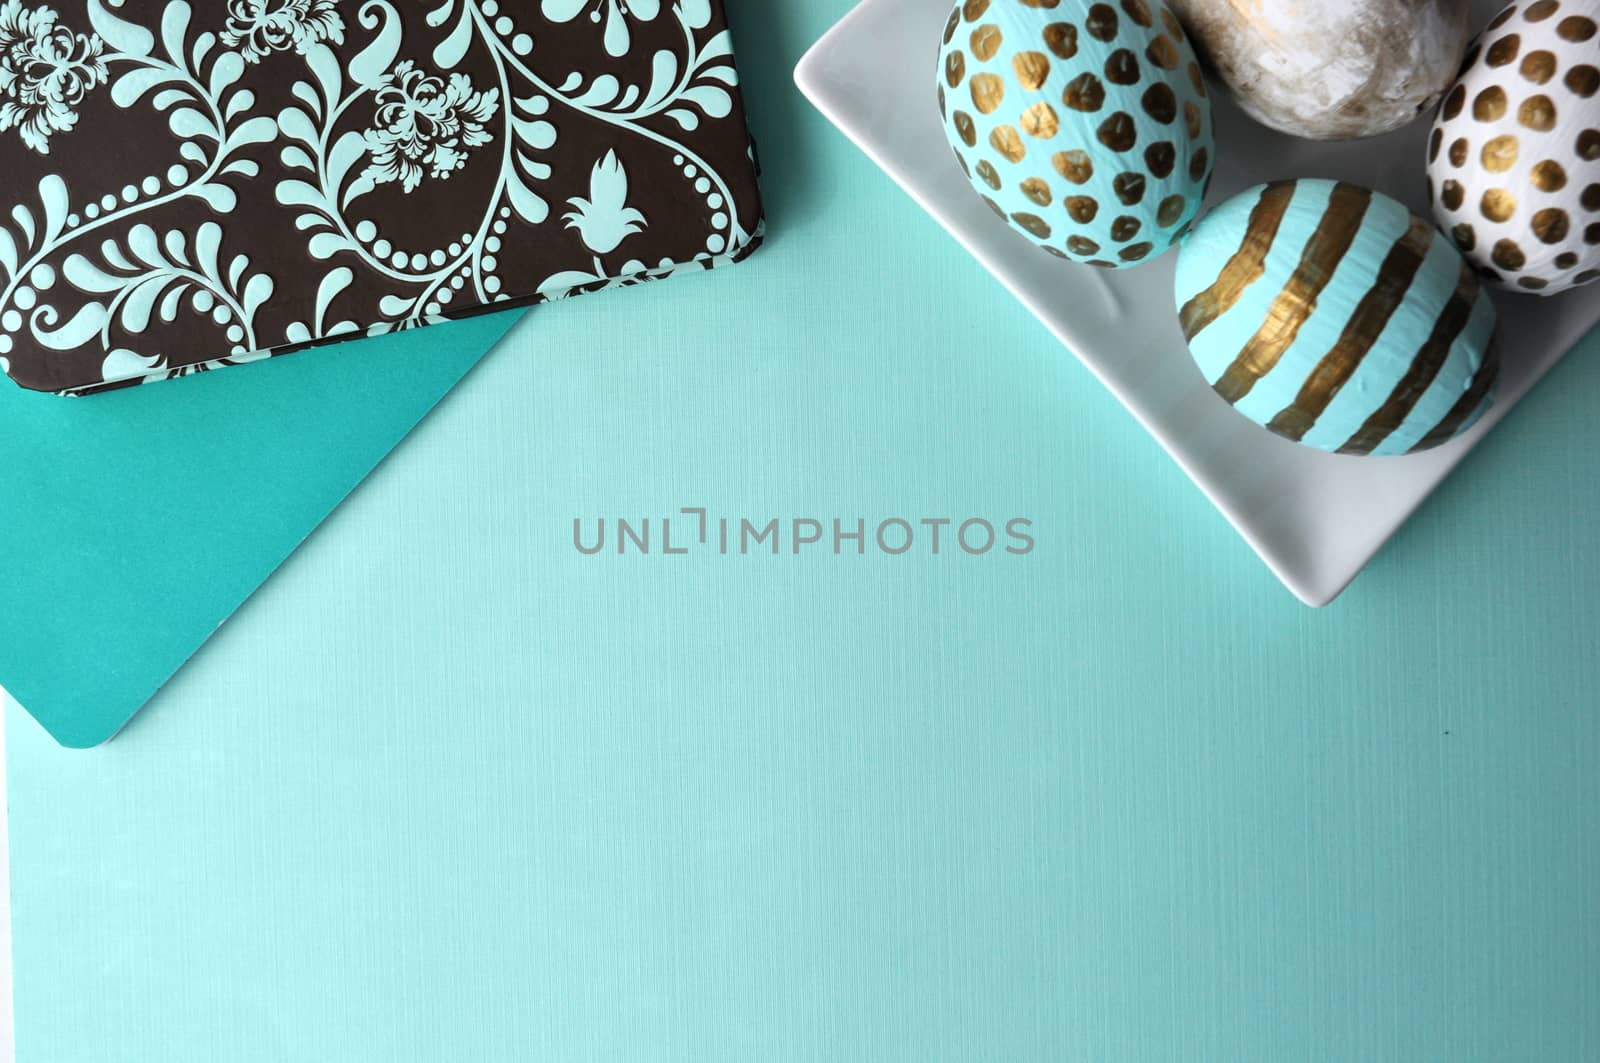 Teal mint turquoise floral notebook with aqua polka dots decorated Easter eggs with copy space